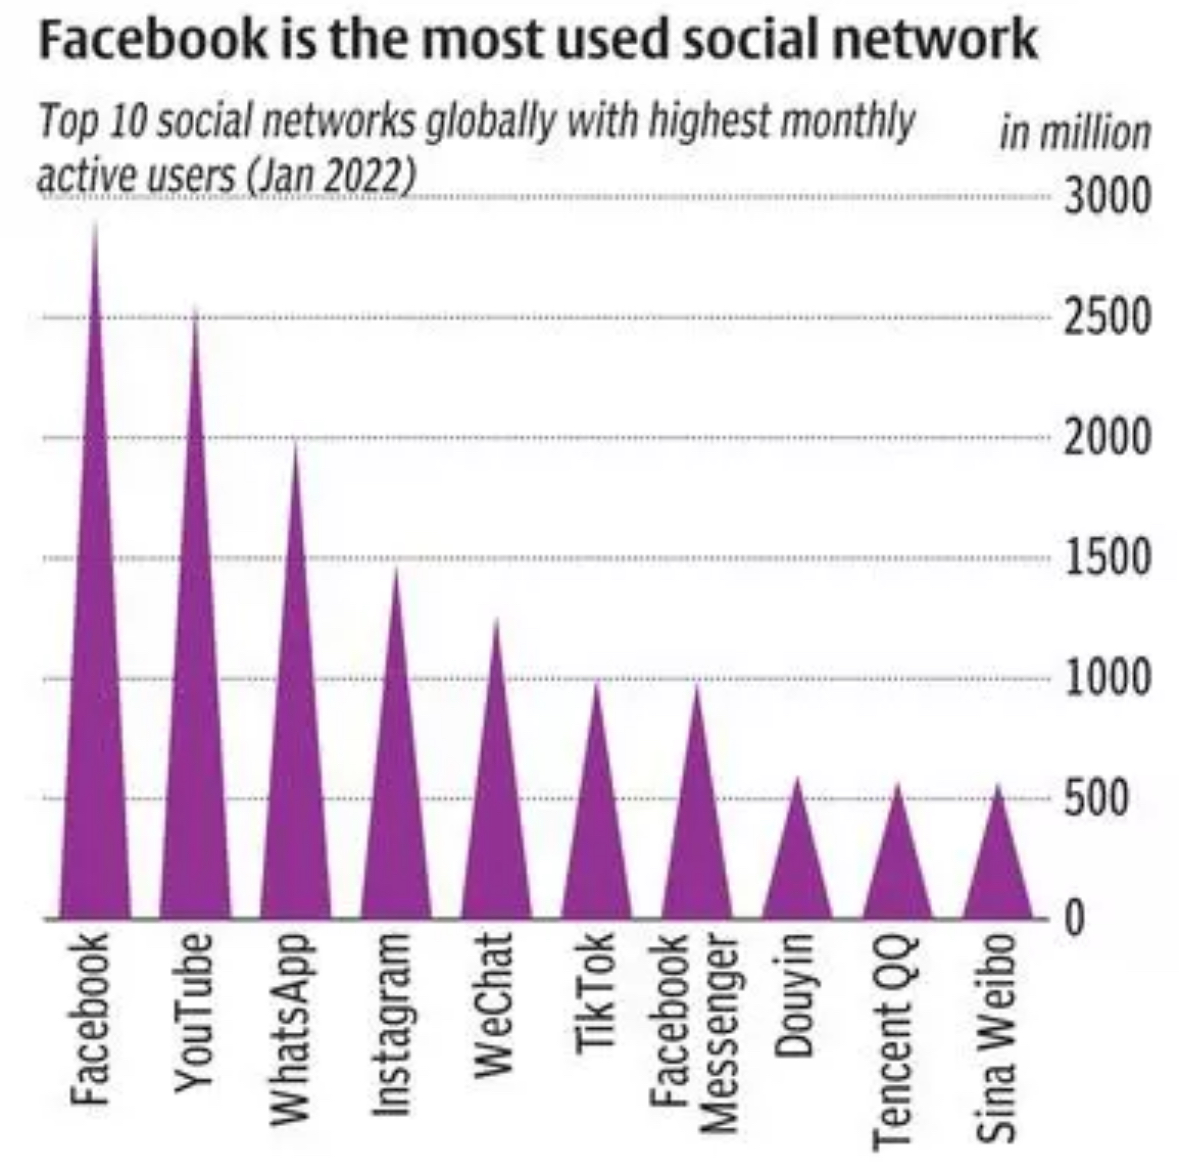 Facebook is the most used social networkFacebook is the most used social network